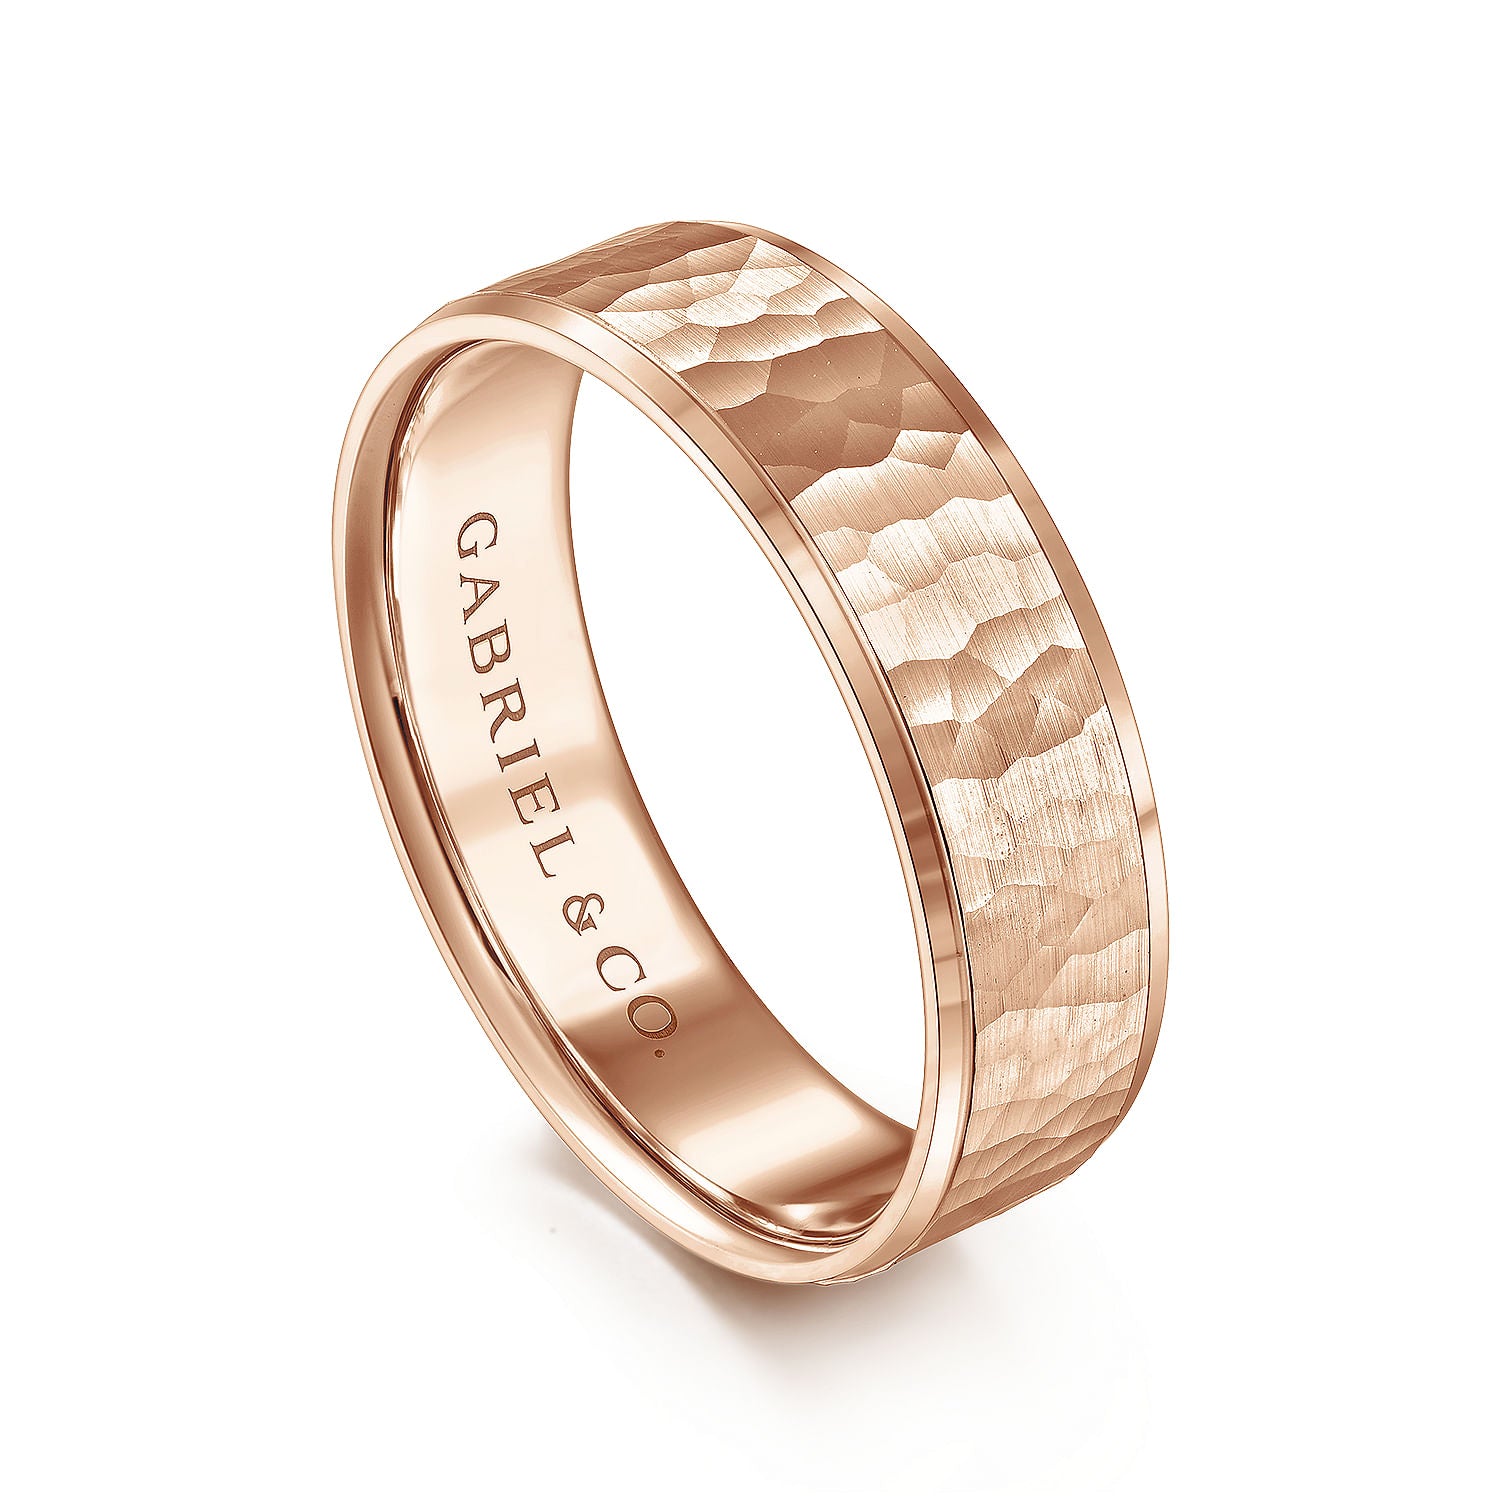 Gabriel & Co Rose Gold Wedding Band With A Hammered Finished Center And A Polished Edge - Gold Wedding Bands - Men's